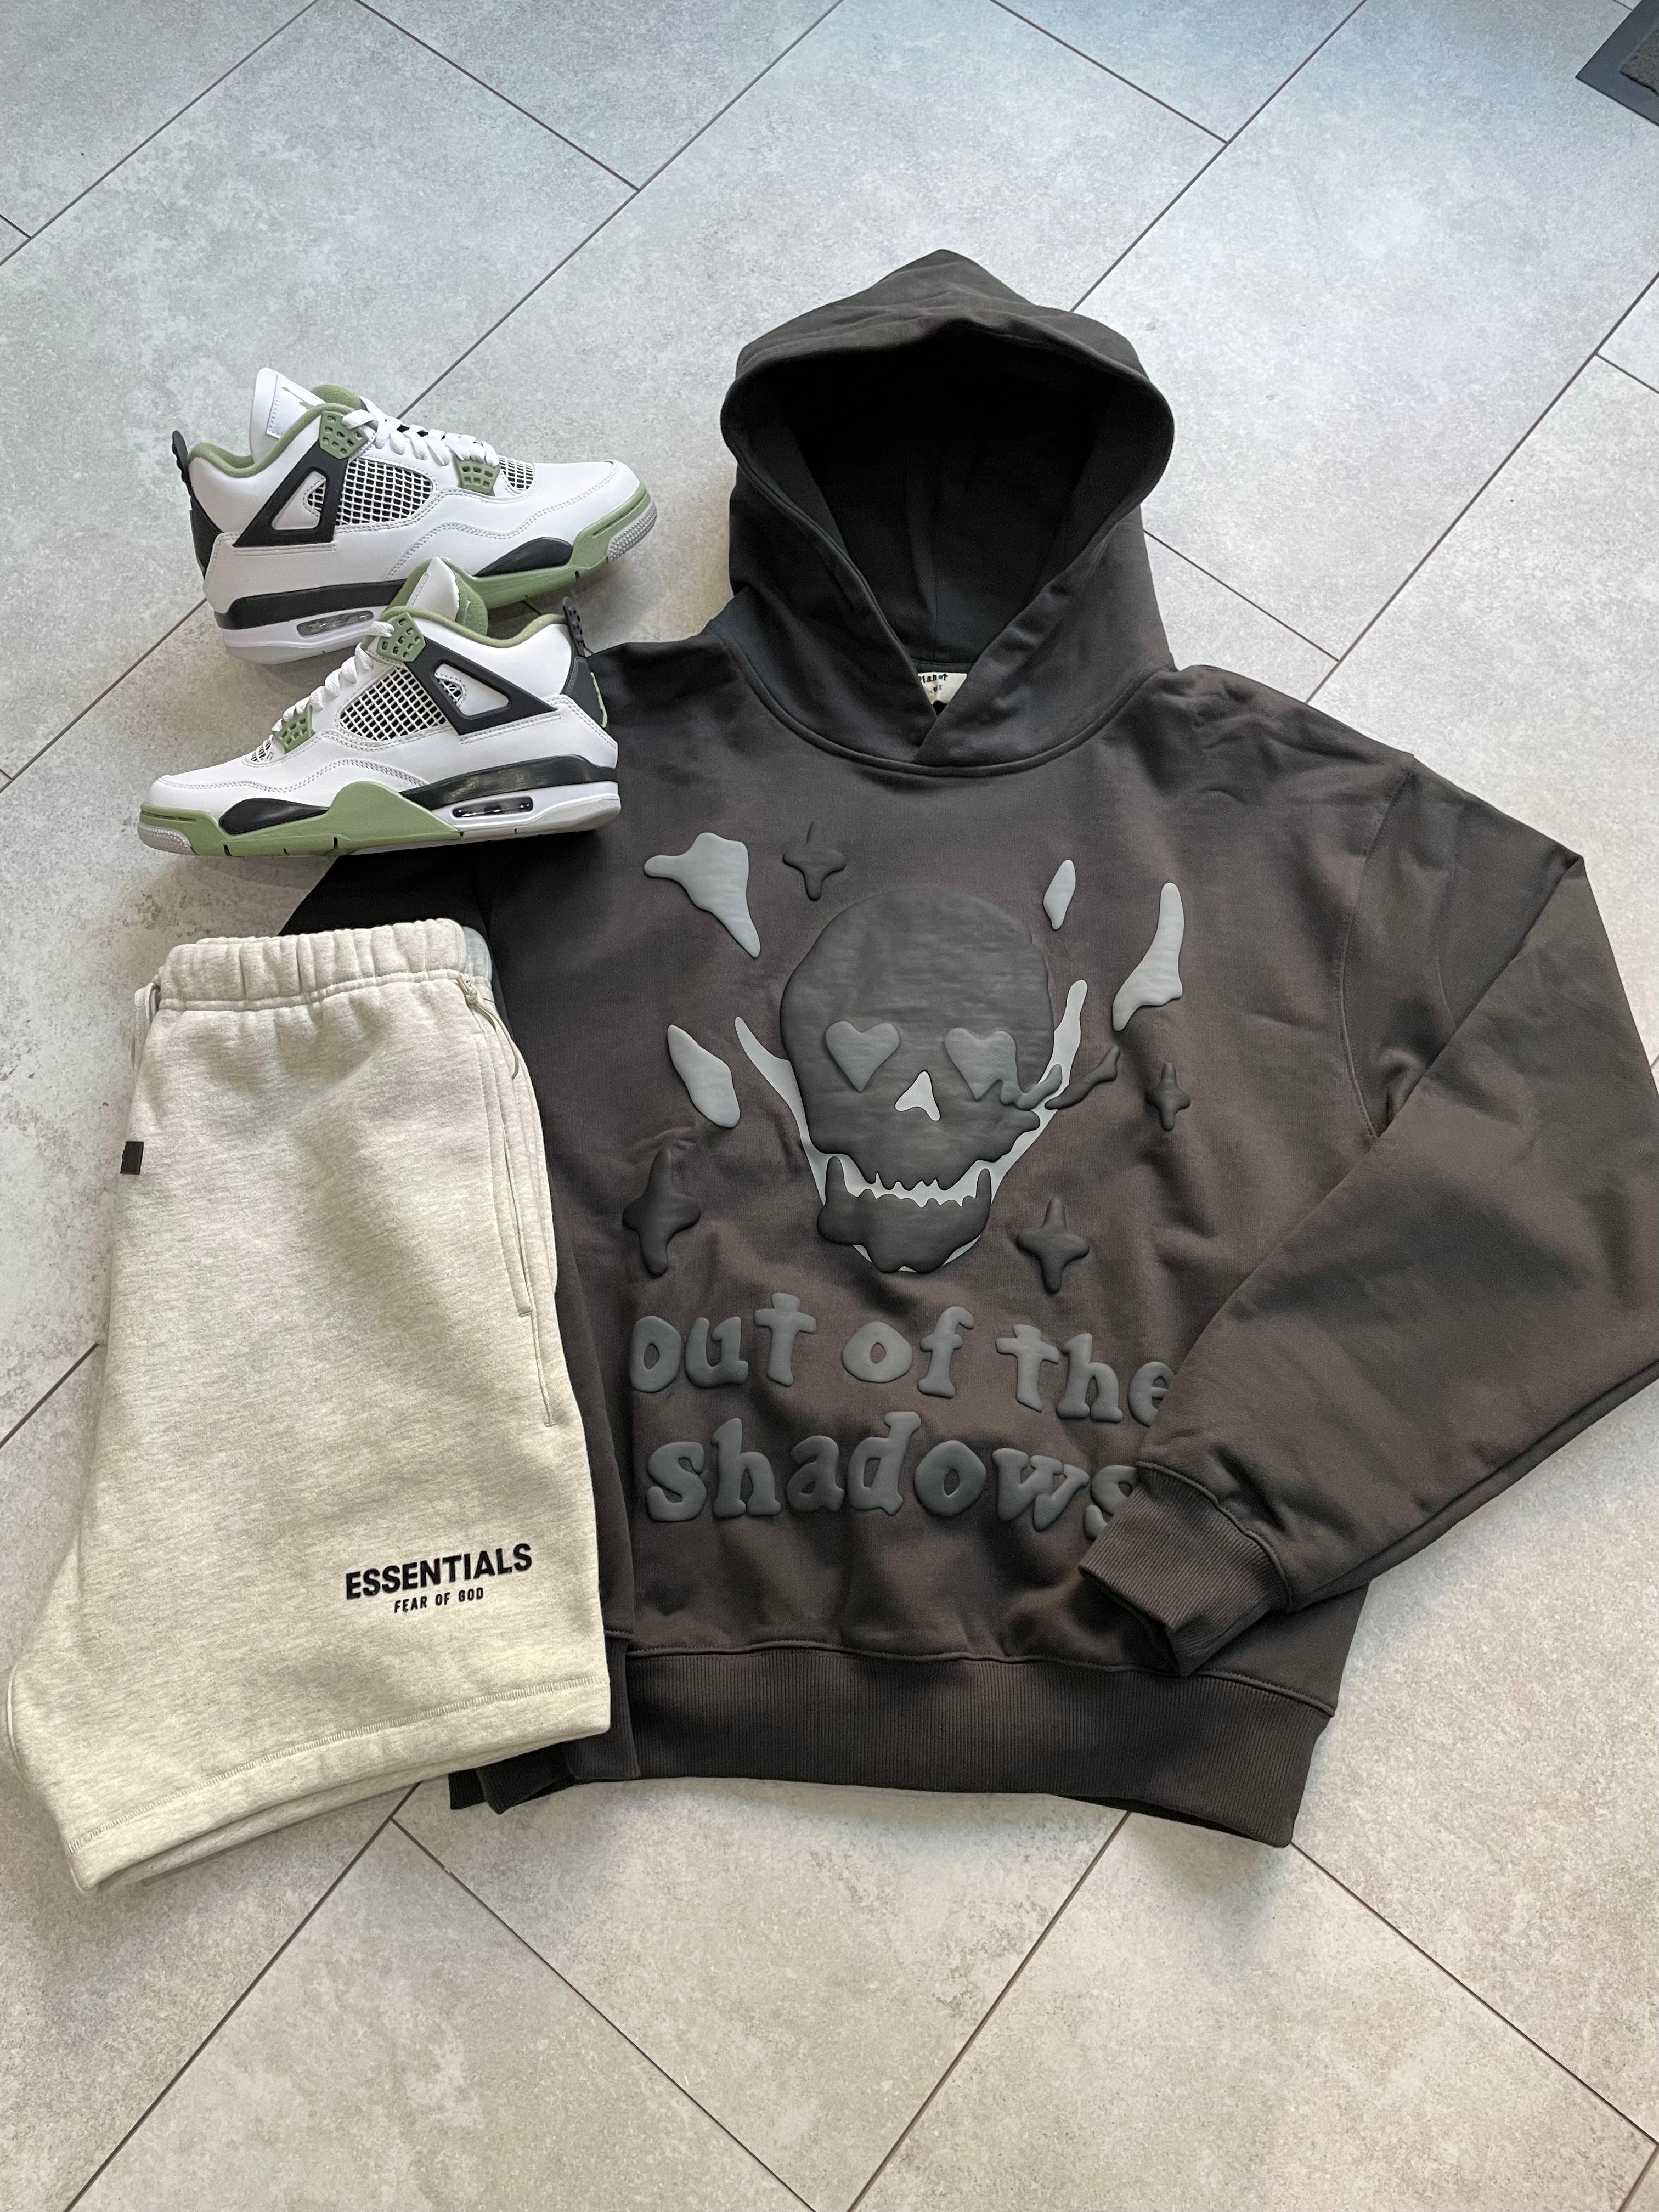 Broken Planet Market 'Out Of The Shadows' Soot Black Hoodie